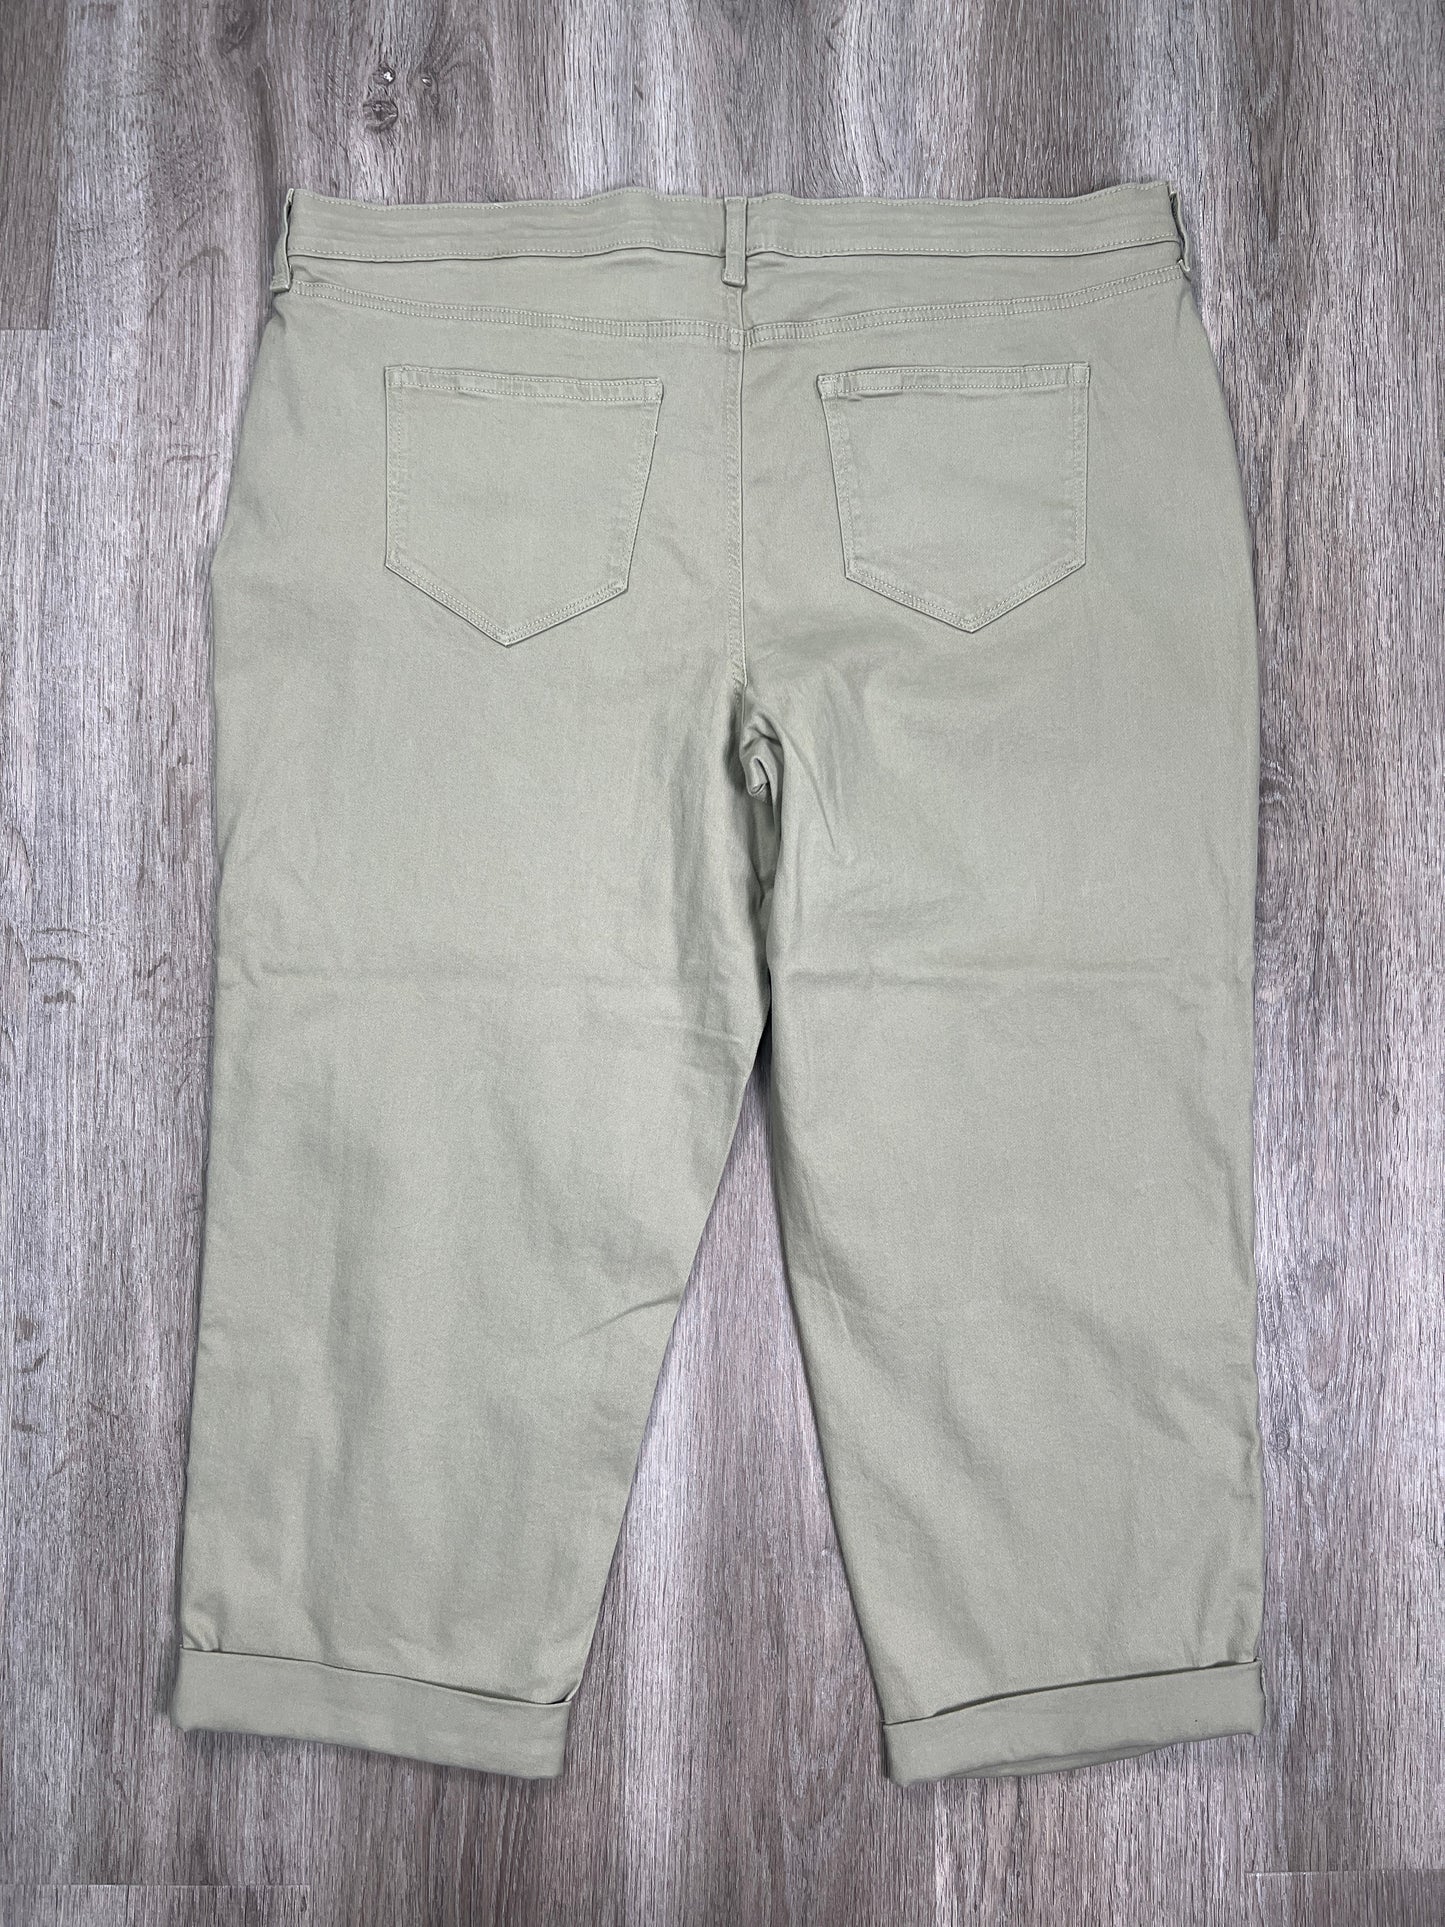 Green Pants Other Sonoma, Size Xxl